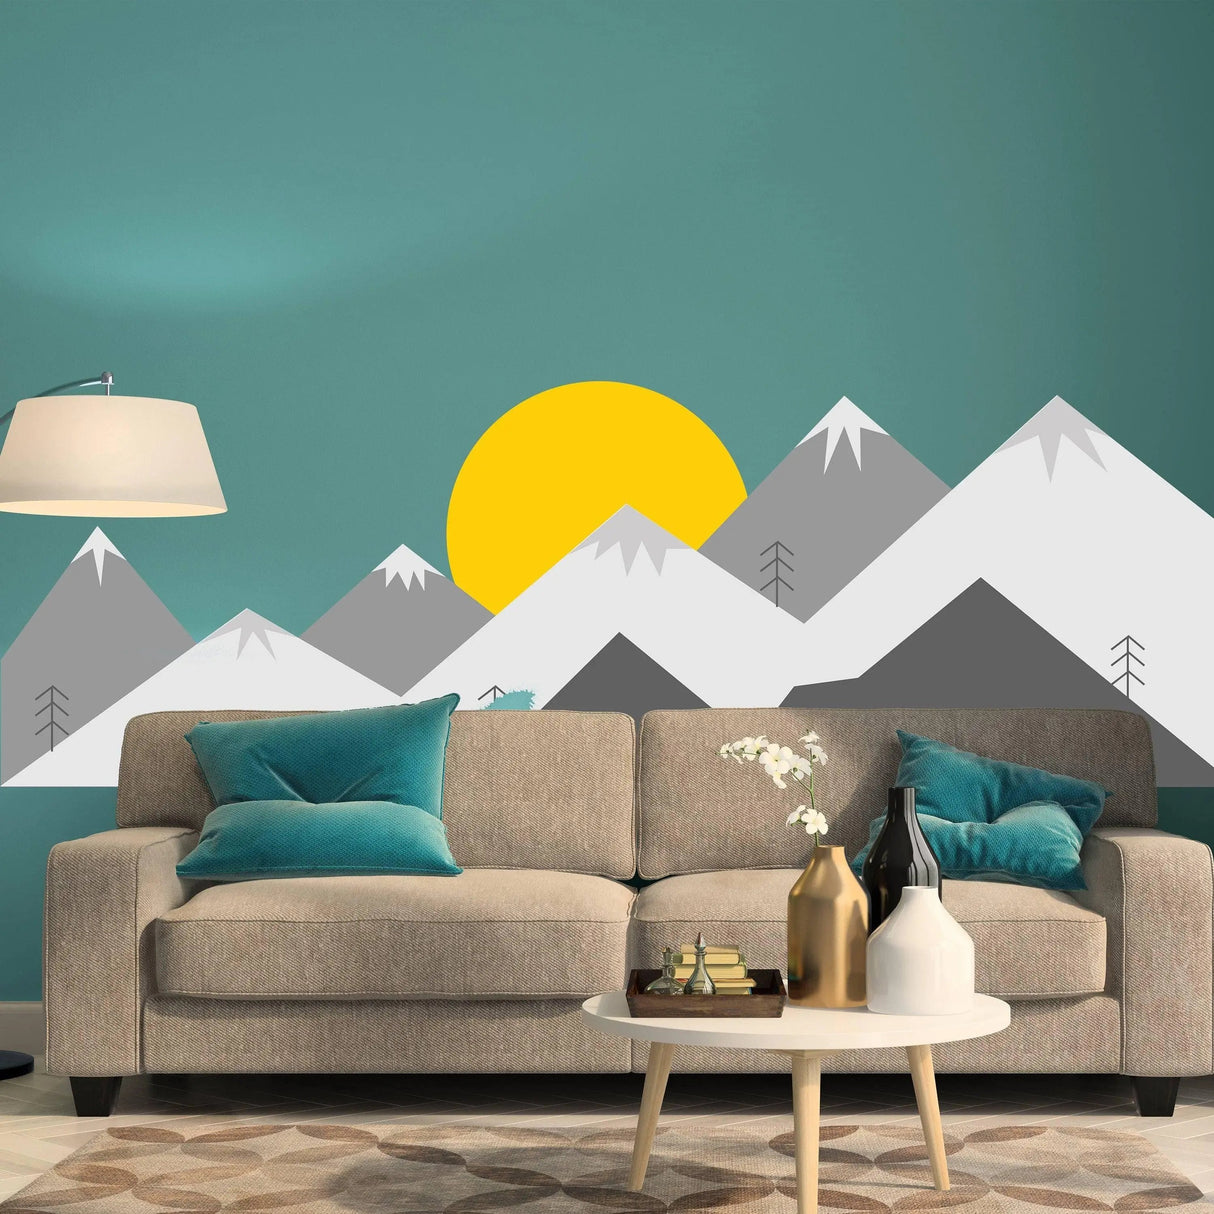 Mountain Wall Decal - Mountains Vinyl Sticker Decor For Nursery Baby Kid Boy Room - Huge Travel Mural Decoration Wallpaper Theme - Decords